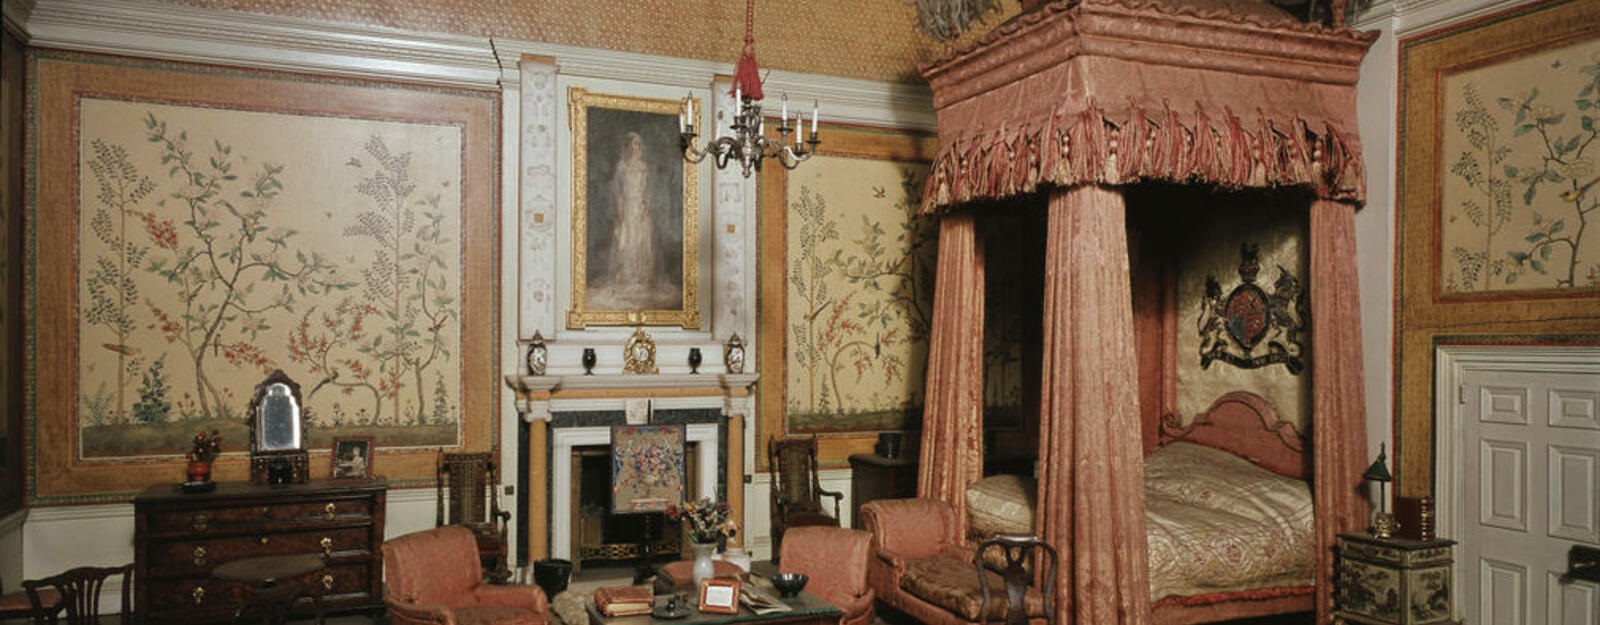 The King's Bedroom